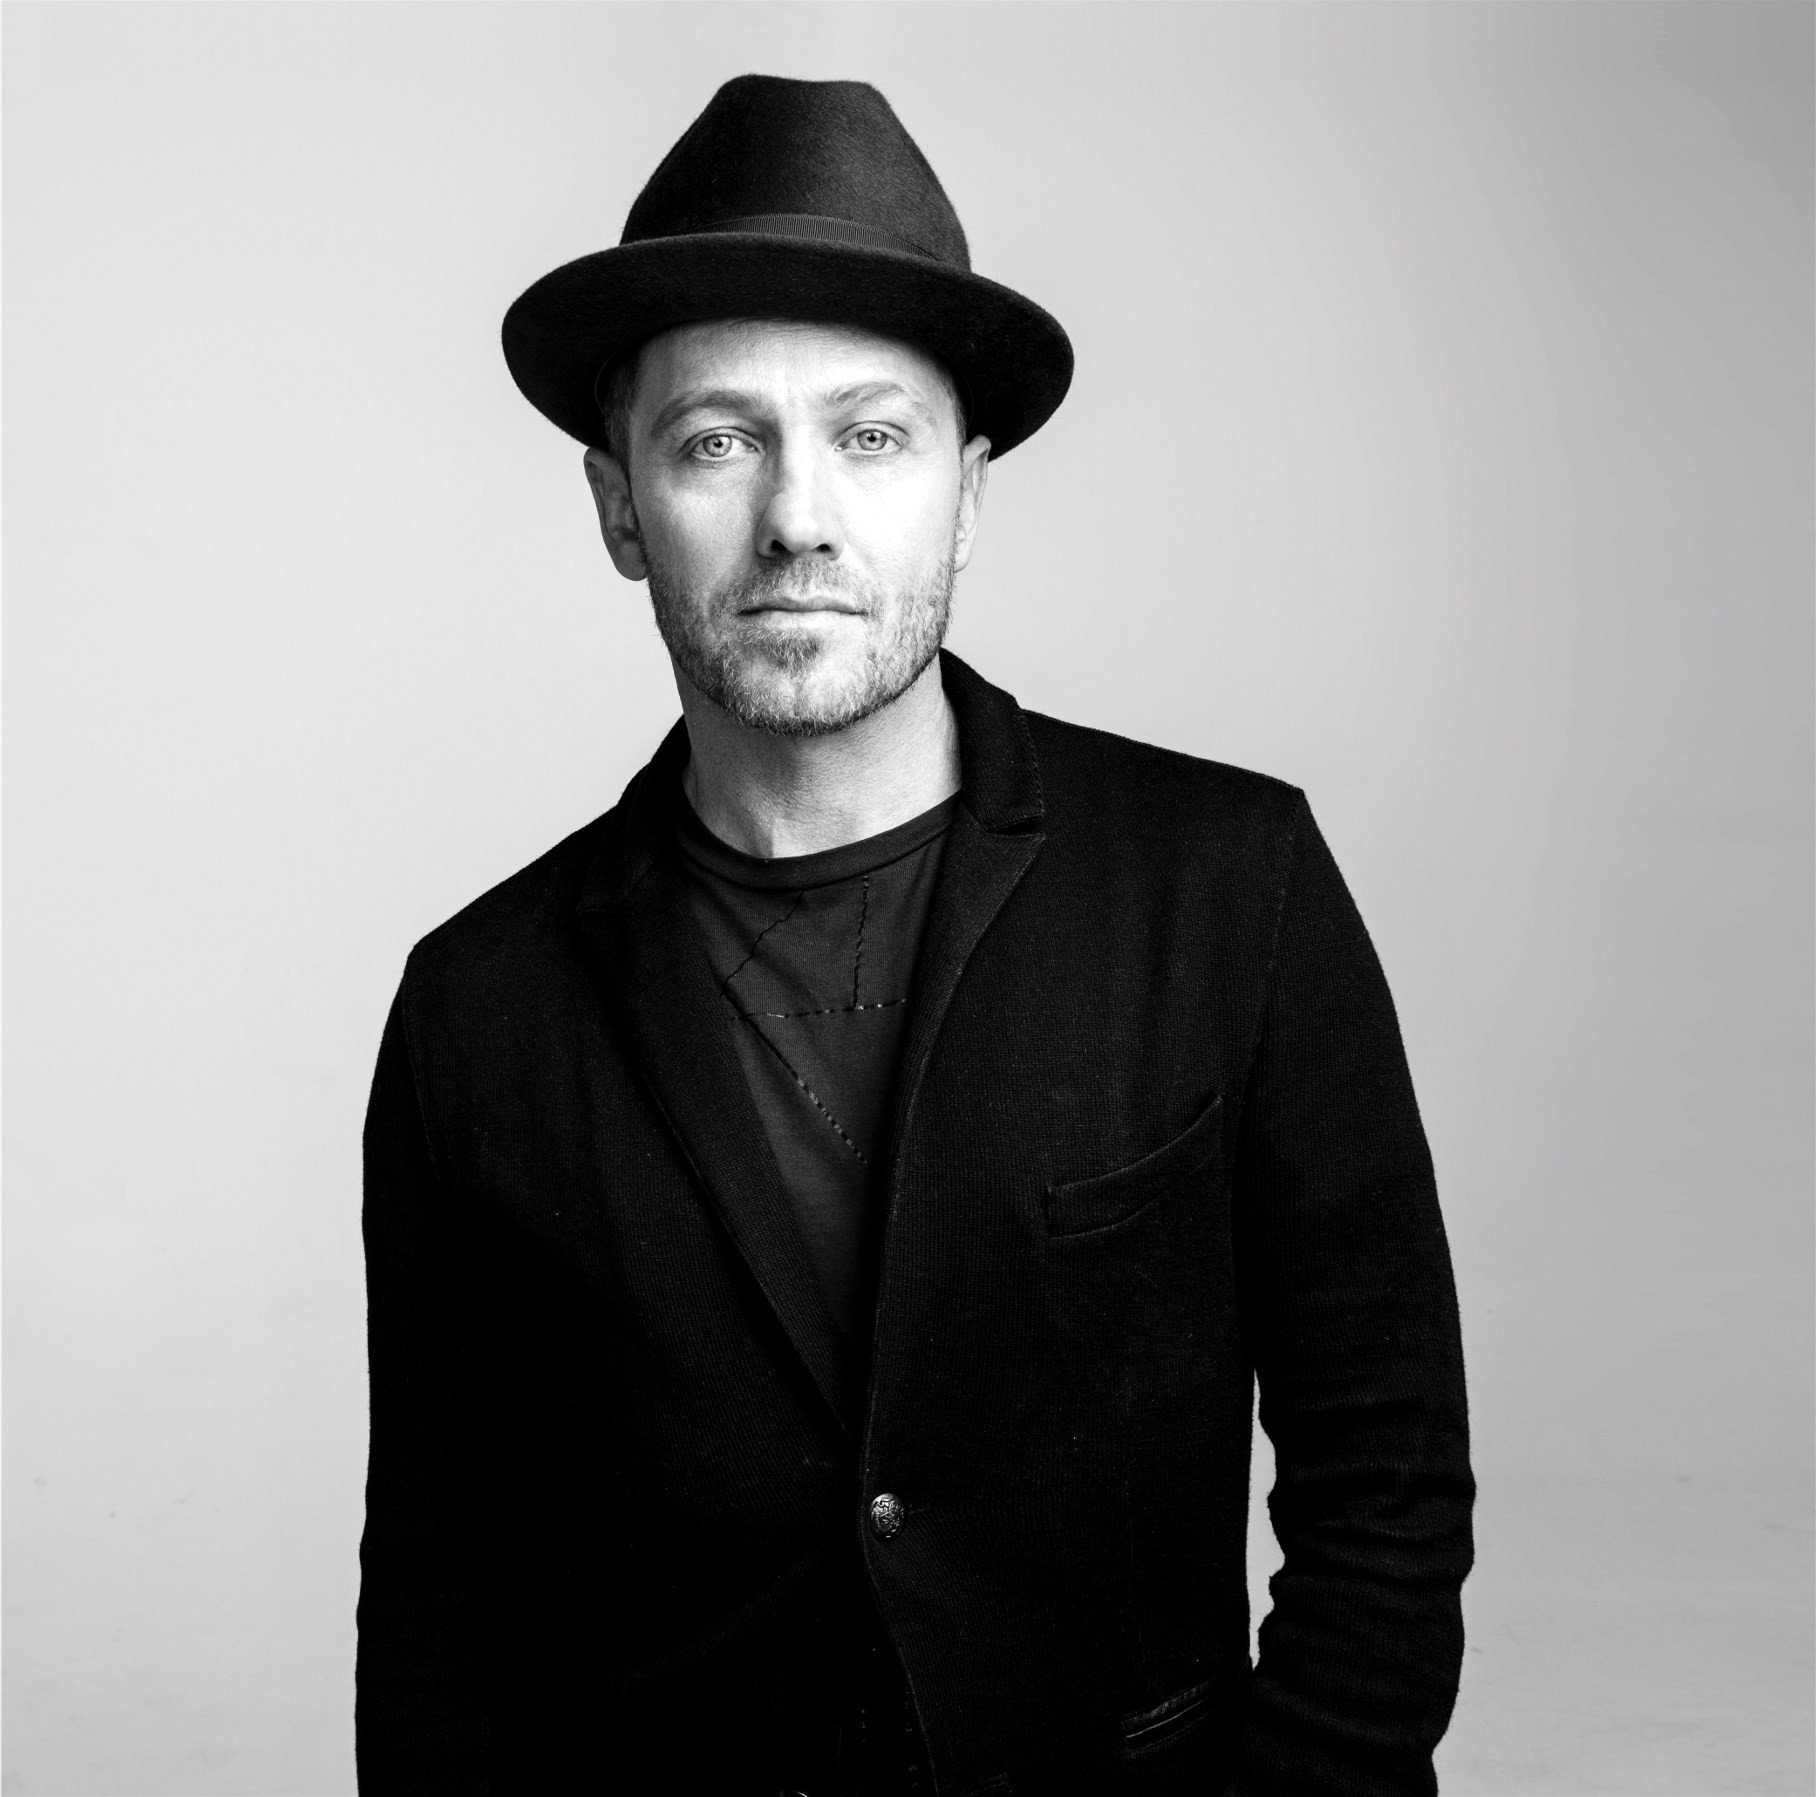 Review: TobyMac blends decades of material and styles at sold-out